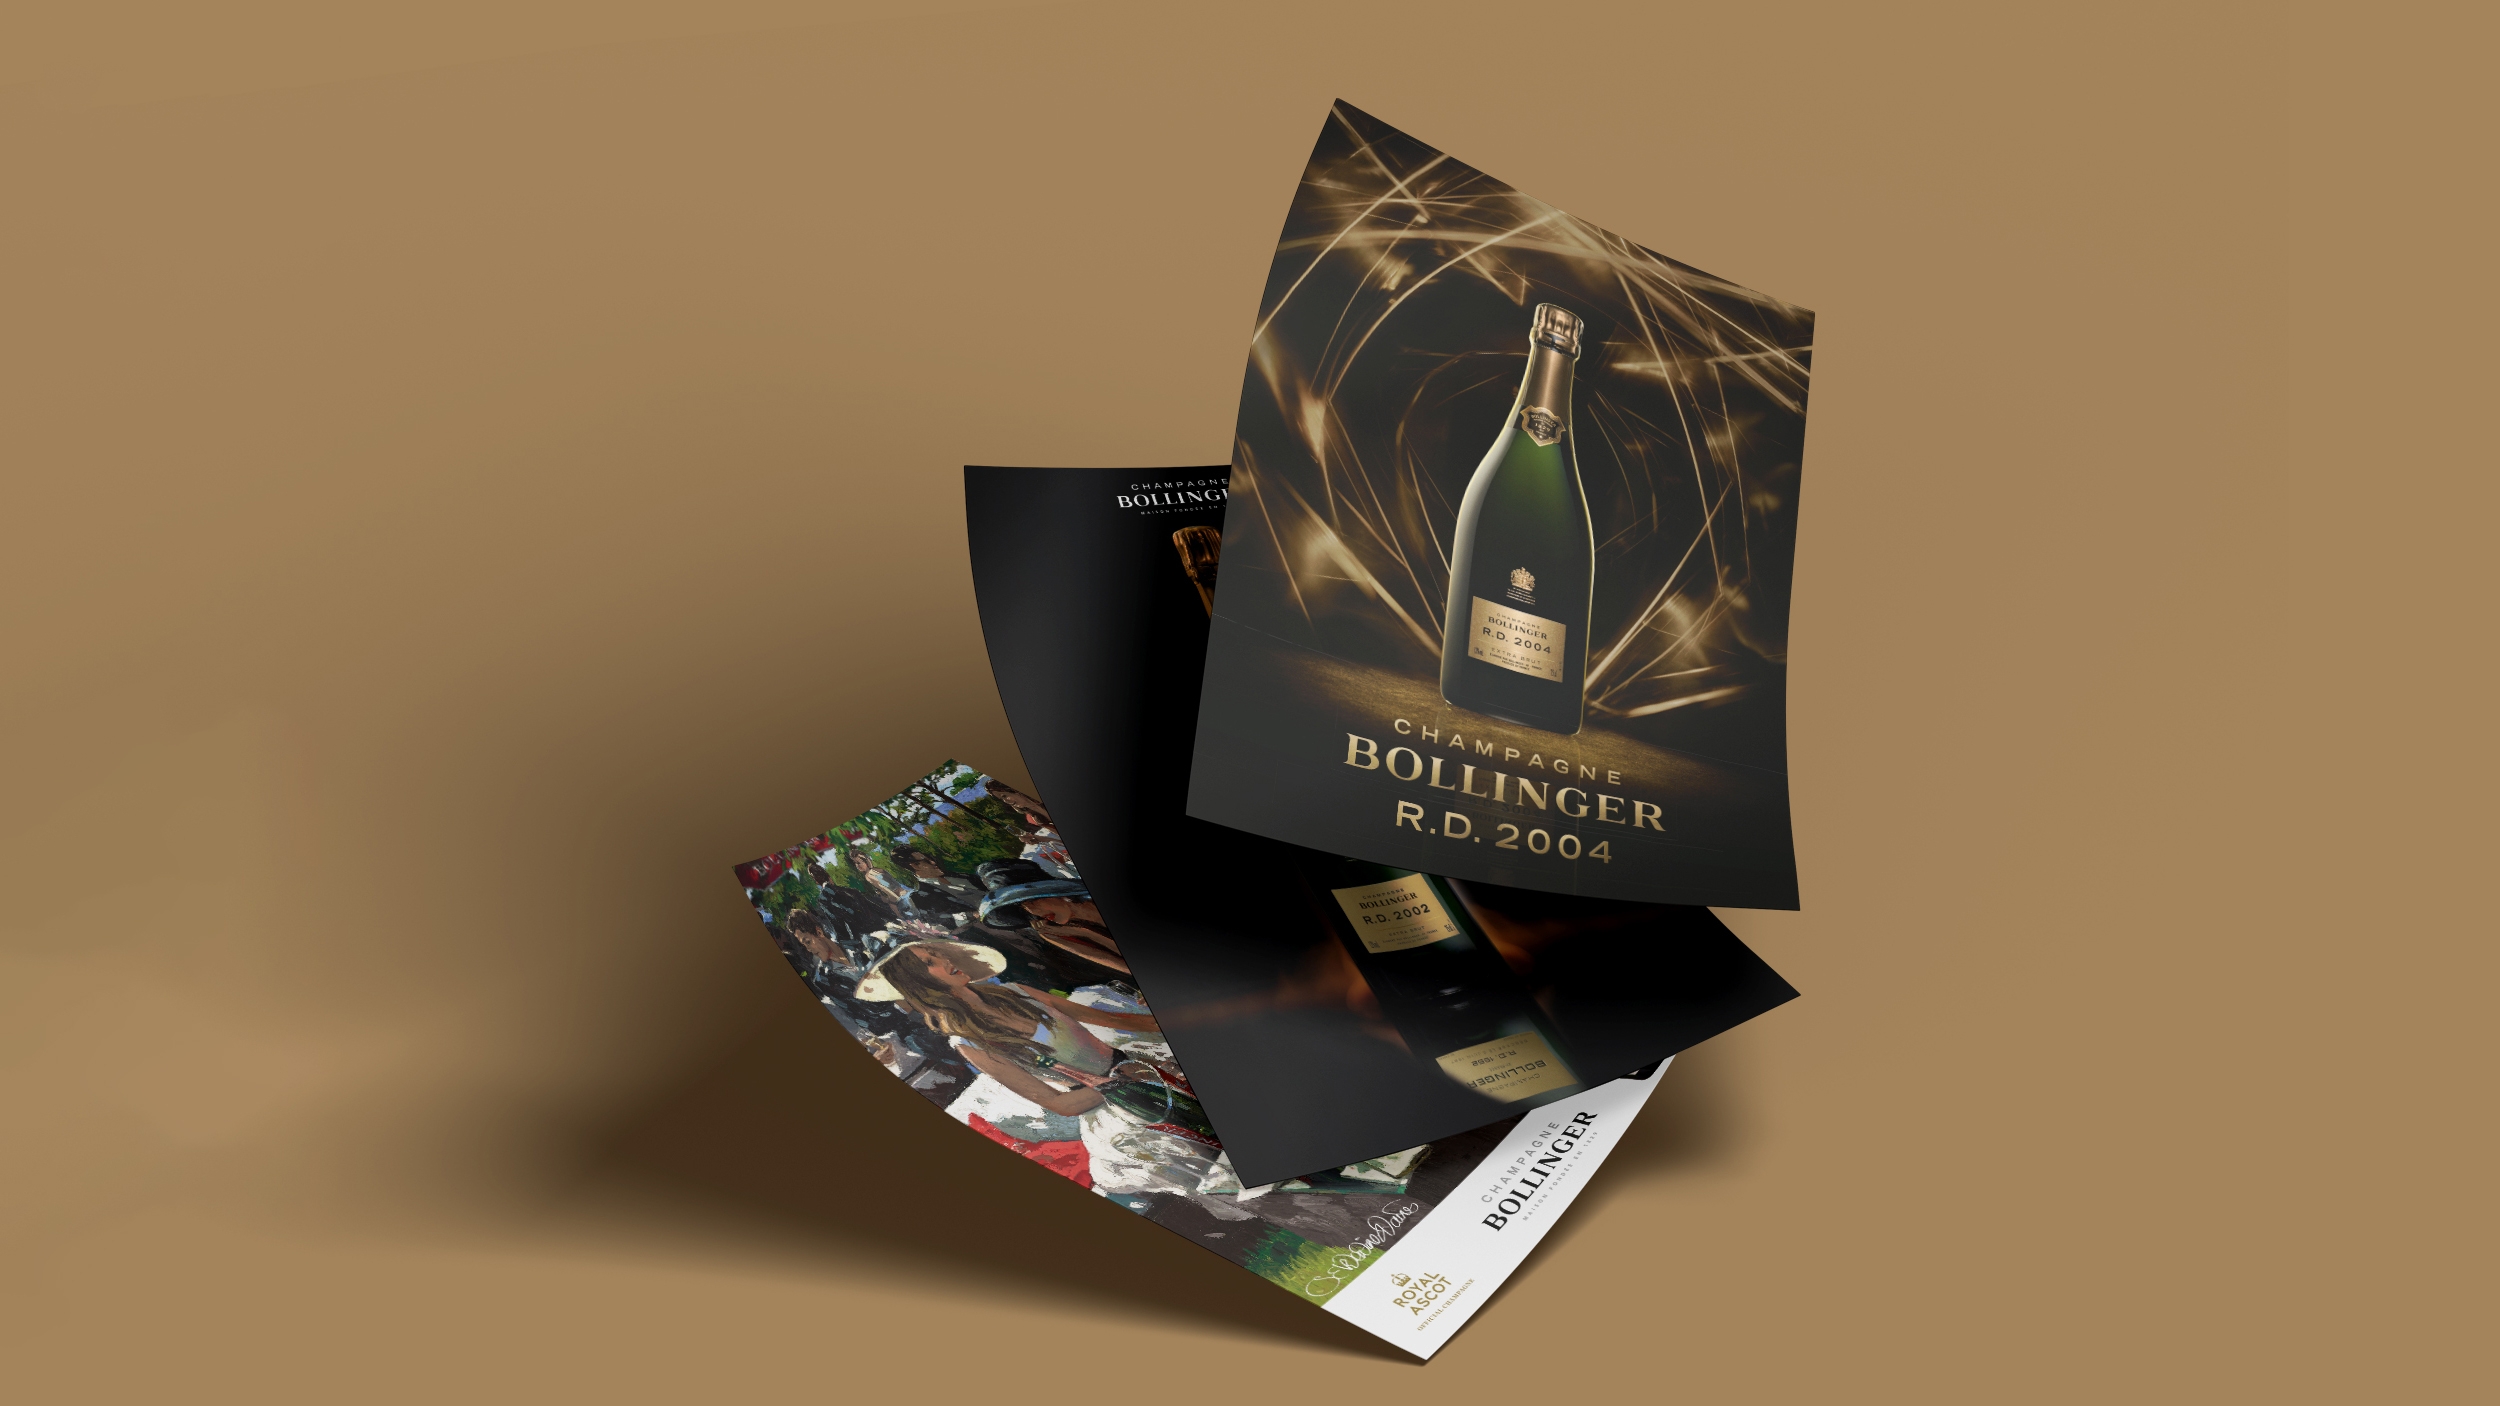 Champagne Bollinger flyers and adverts